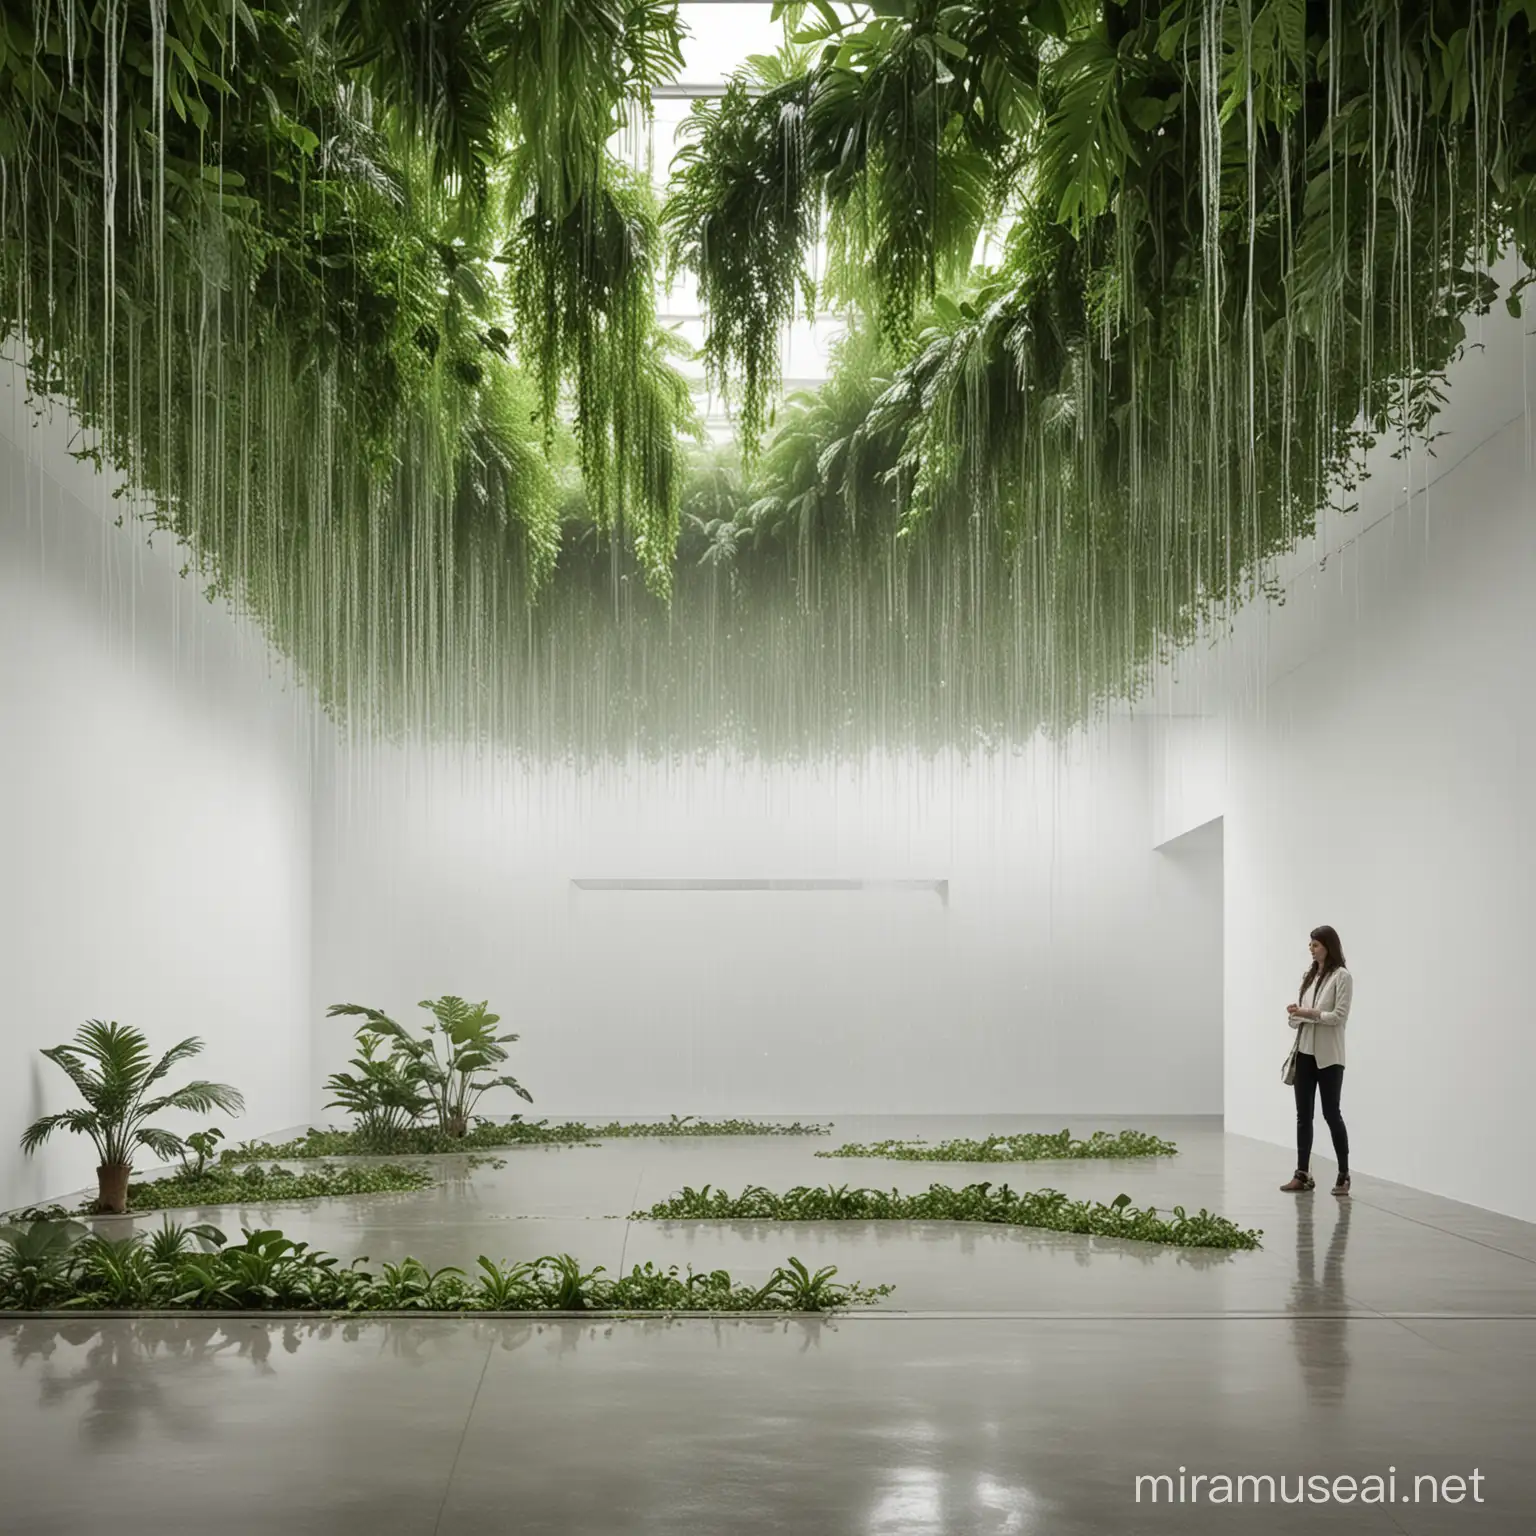 an exhibition space inspired by a rainforest ecosystem. there is a horizontal rain installation in the center of the room. show a wide view of this room, with more white space and space to walk. show me the room from all angles.